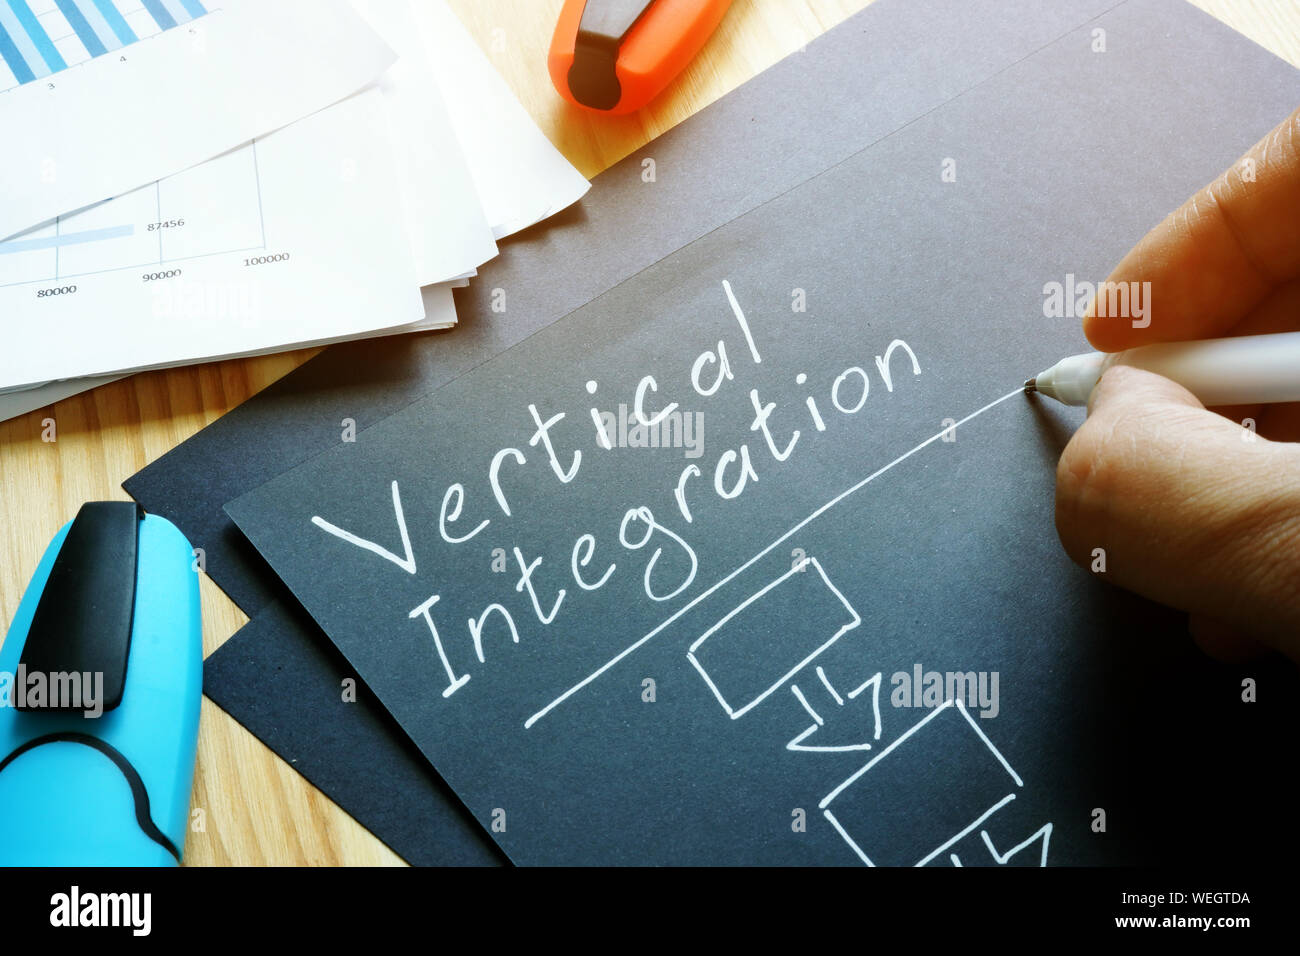 Man is writing about Vertical Integration. Stock Photo